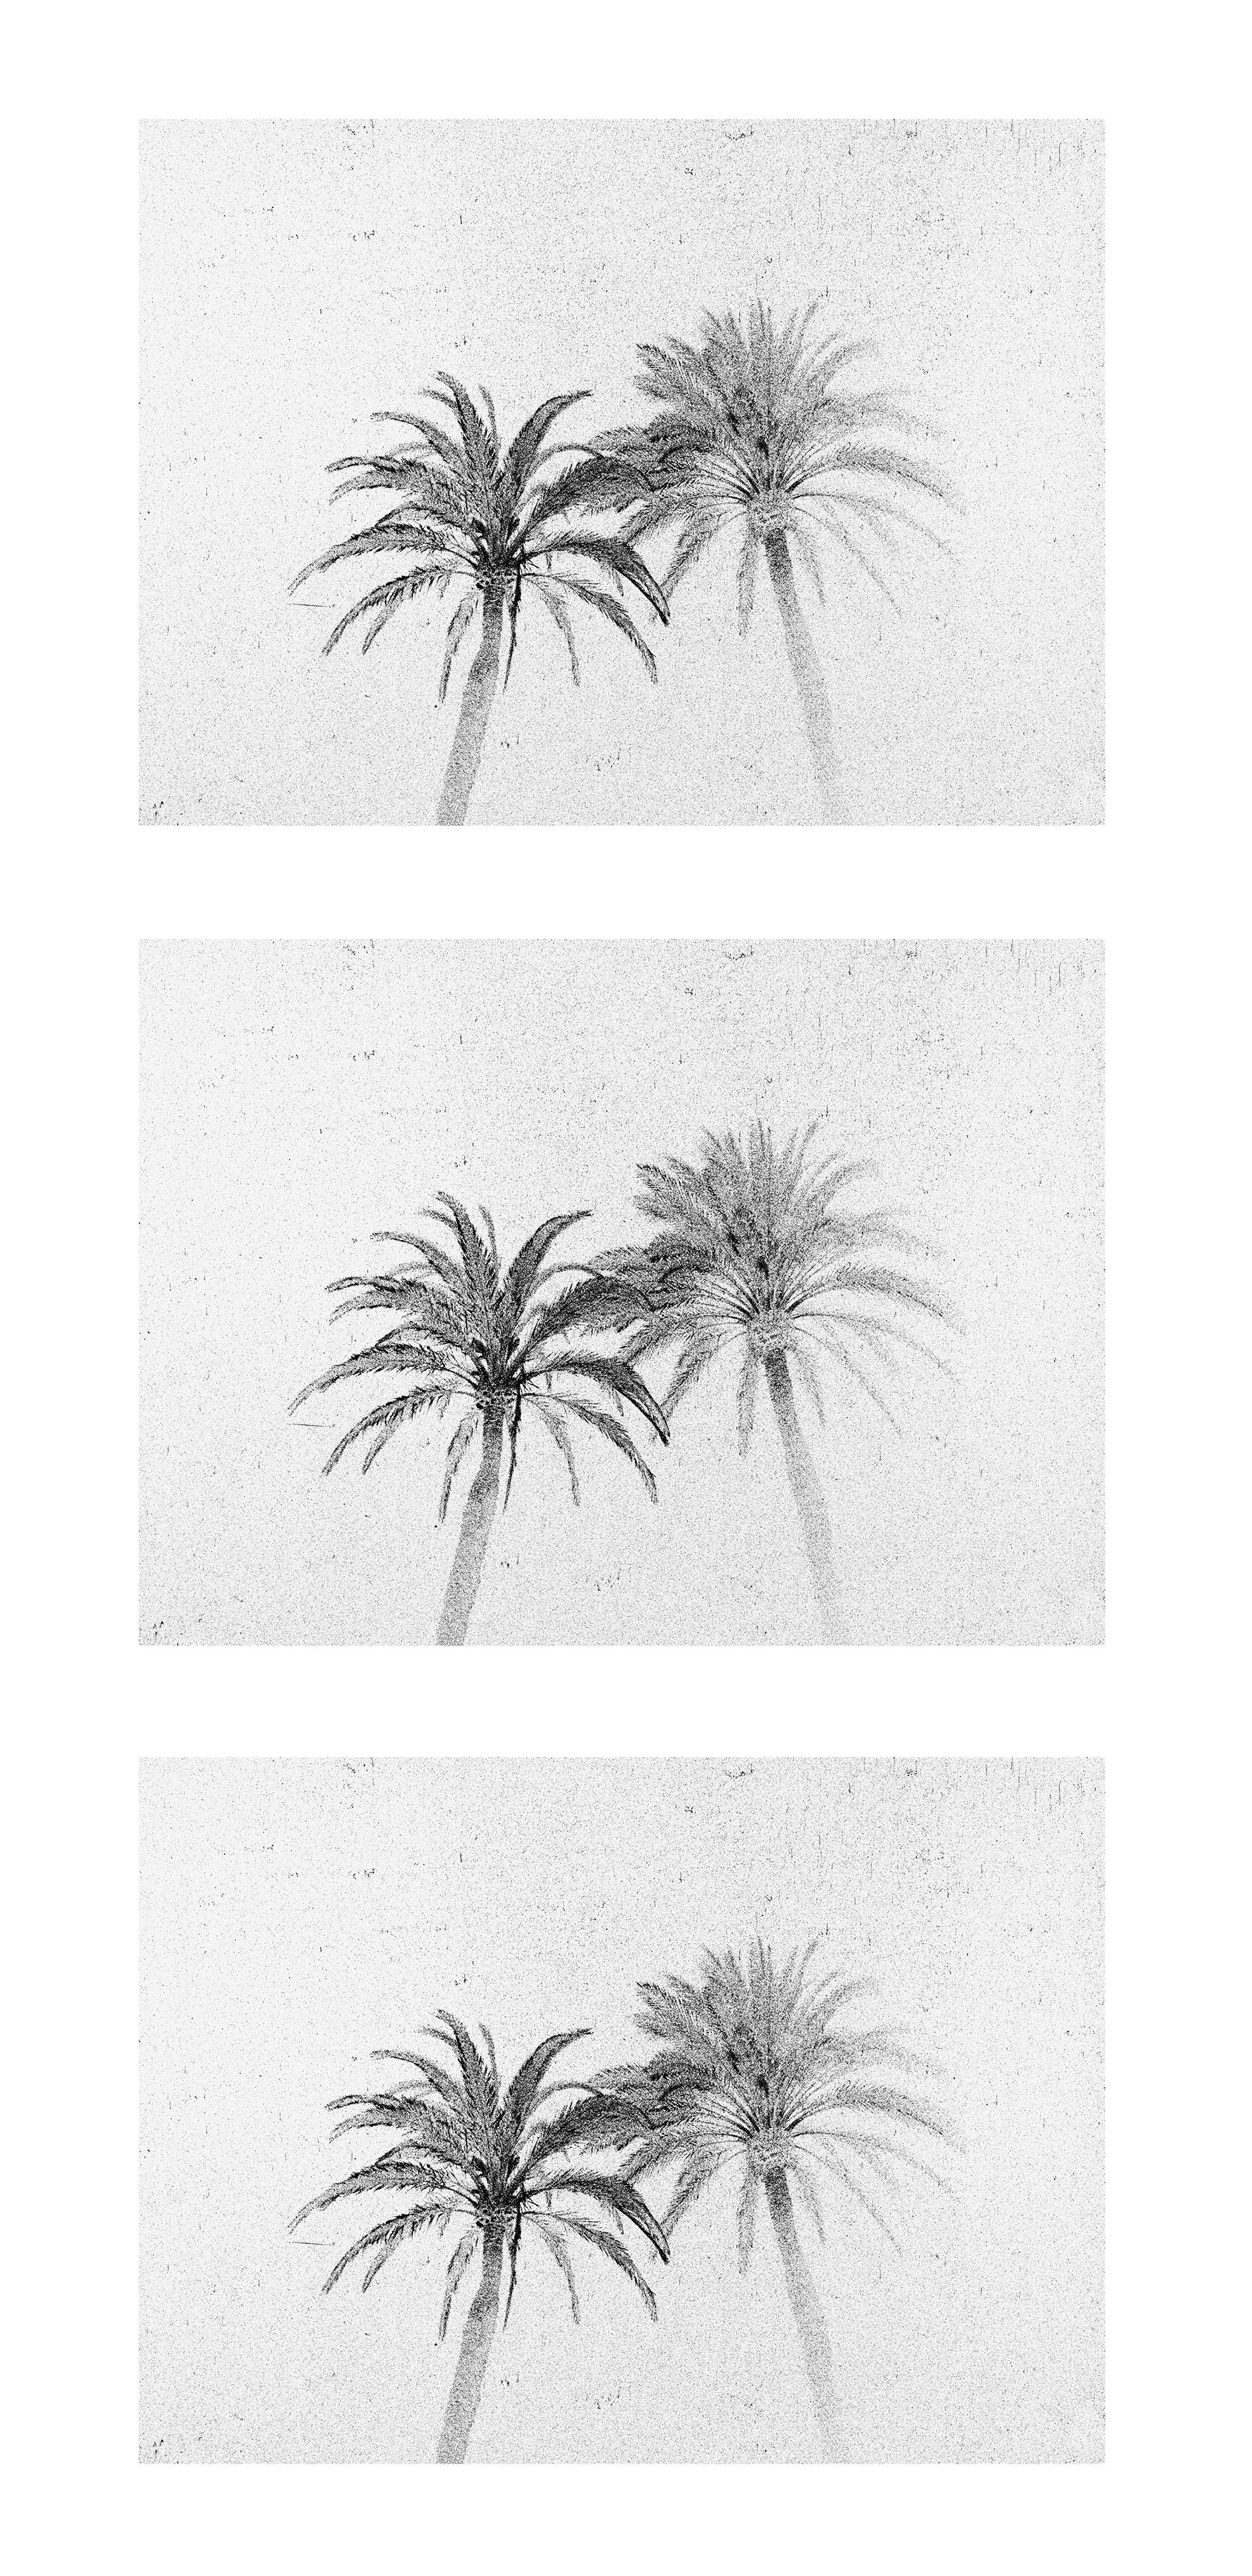 Three Palms-Black and white photo, gelatin silver triptych, palm trees, nature